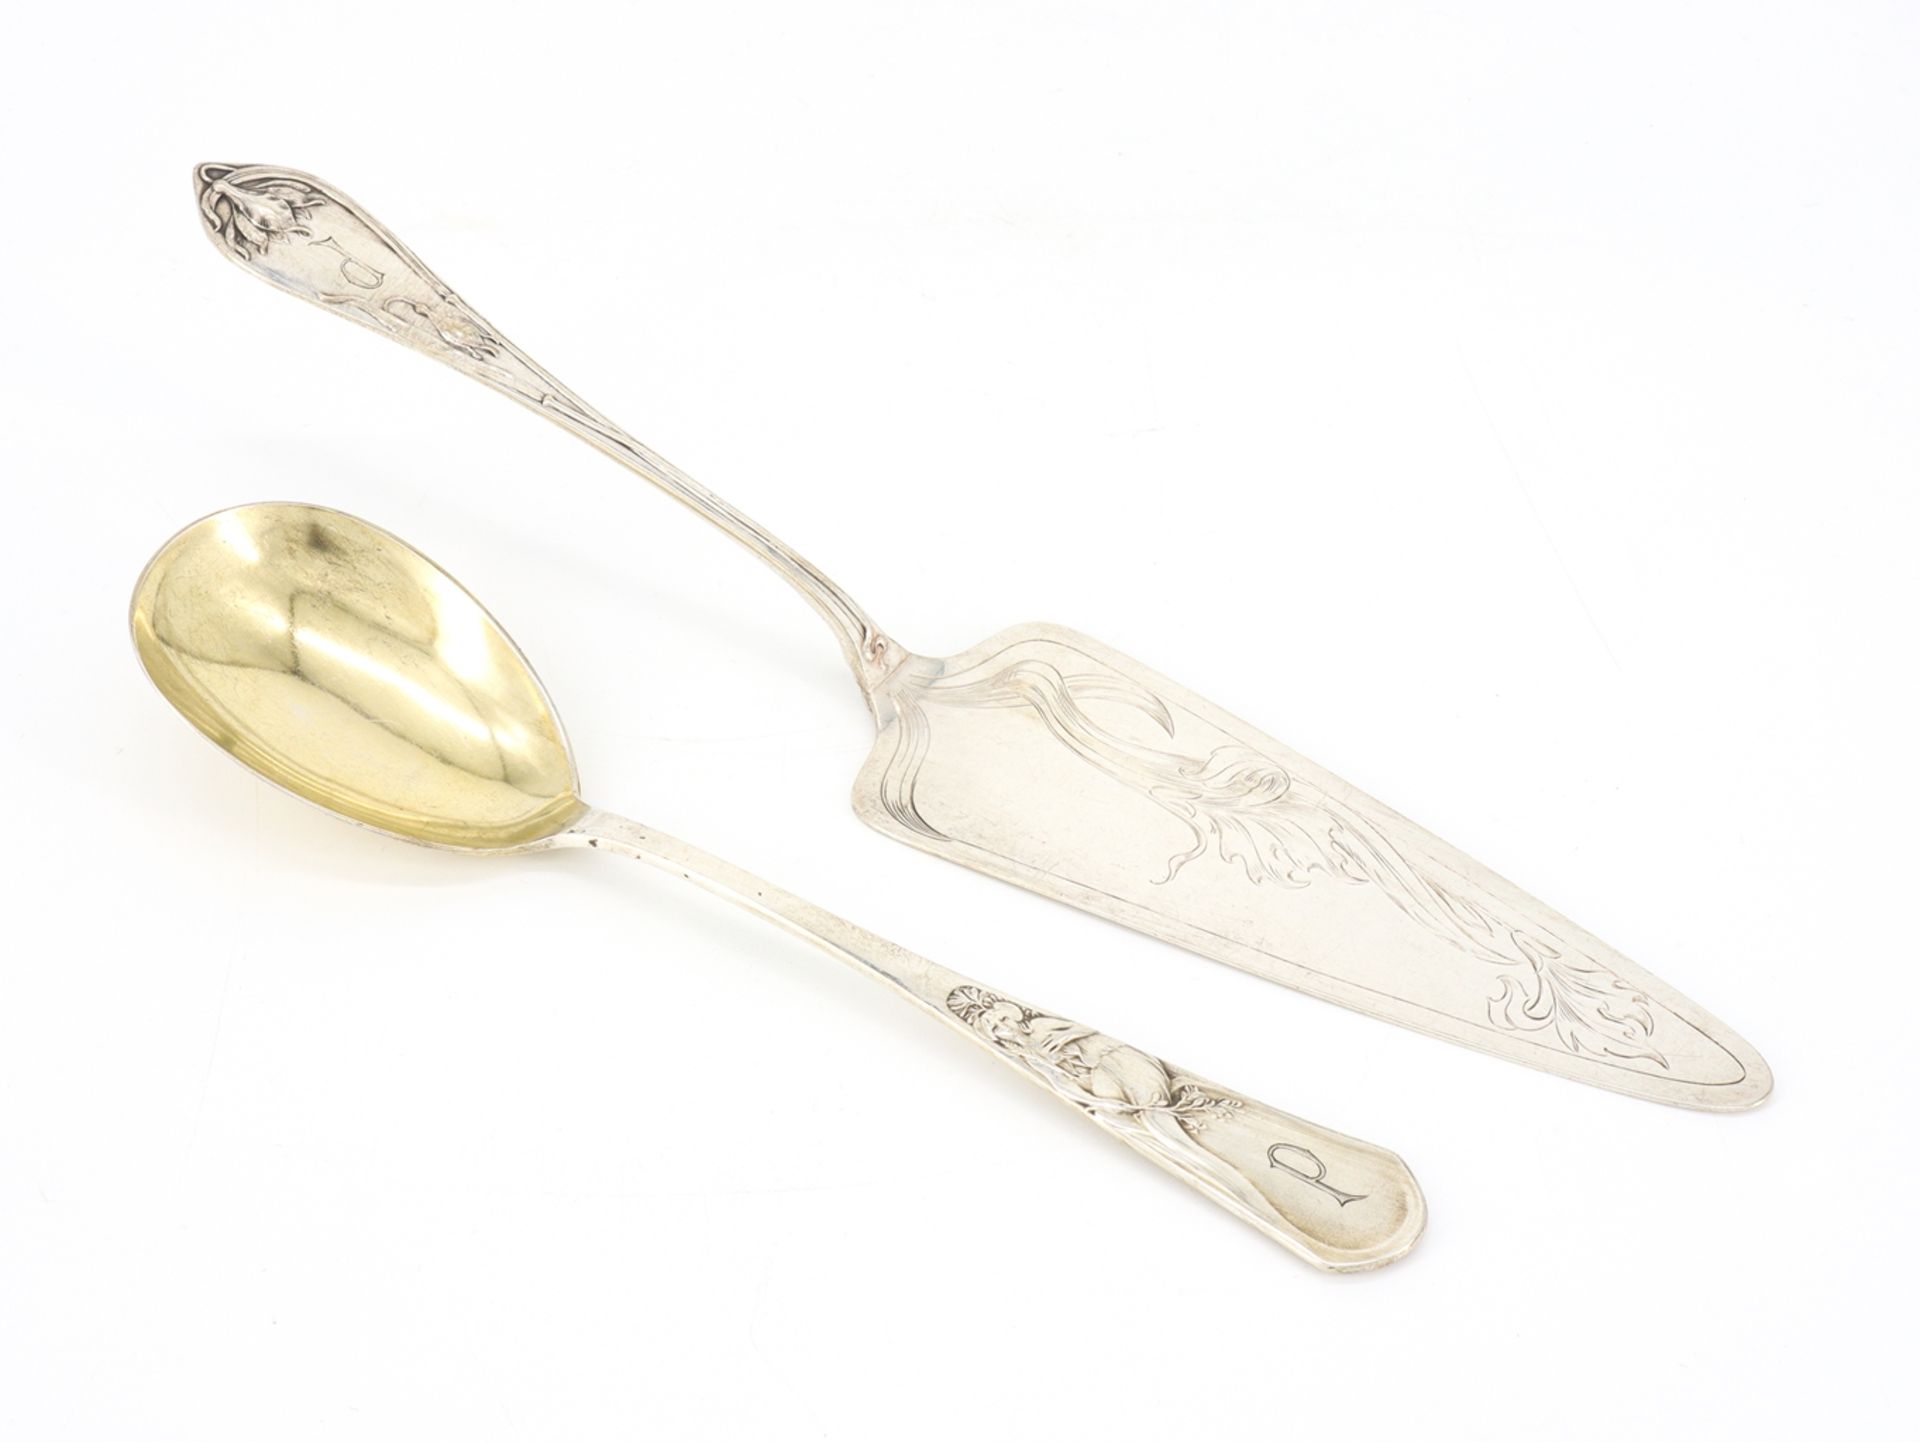 2 pieces of cutlery in finest art nouveau 800 silver circa 1900. - Image 2 of 8